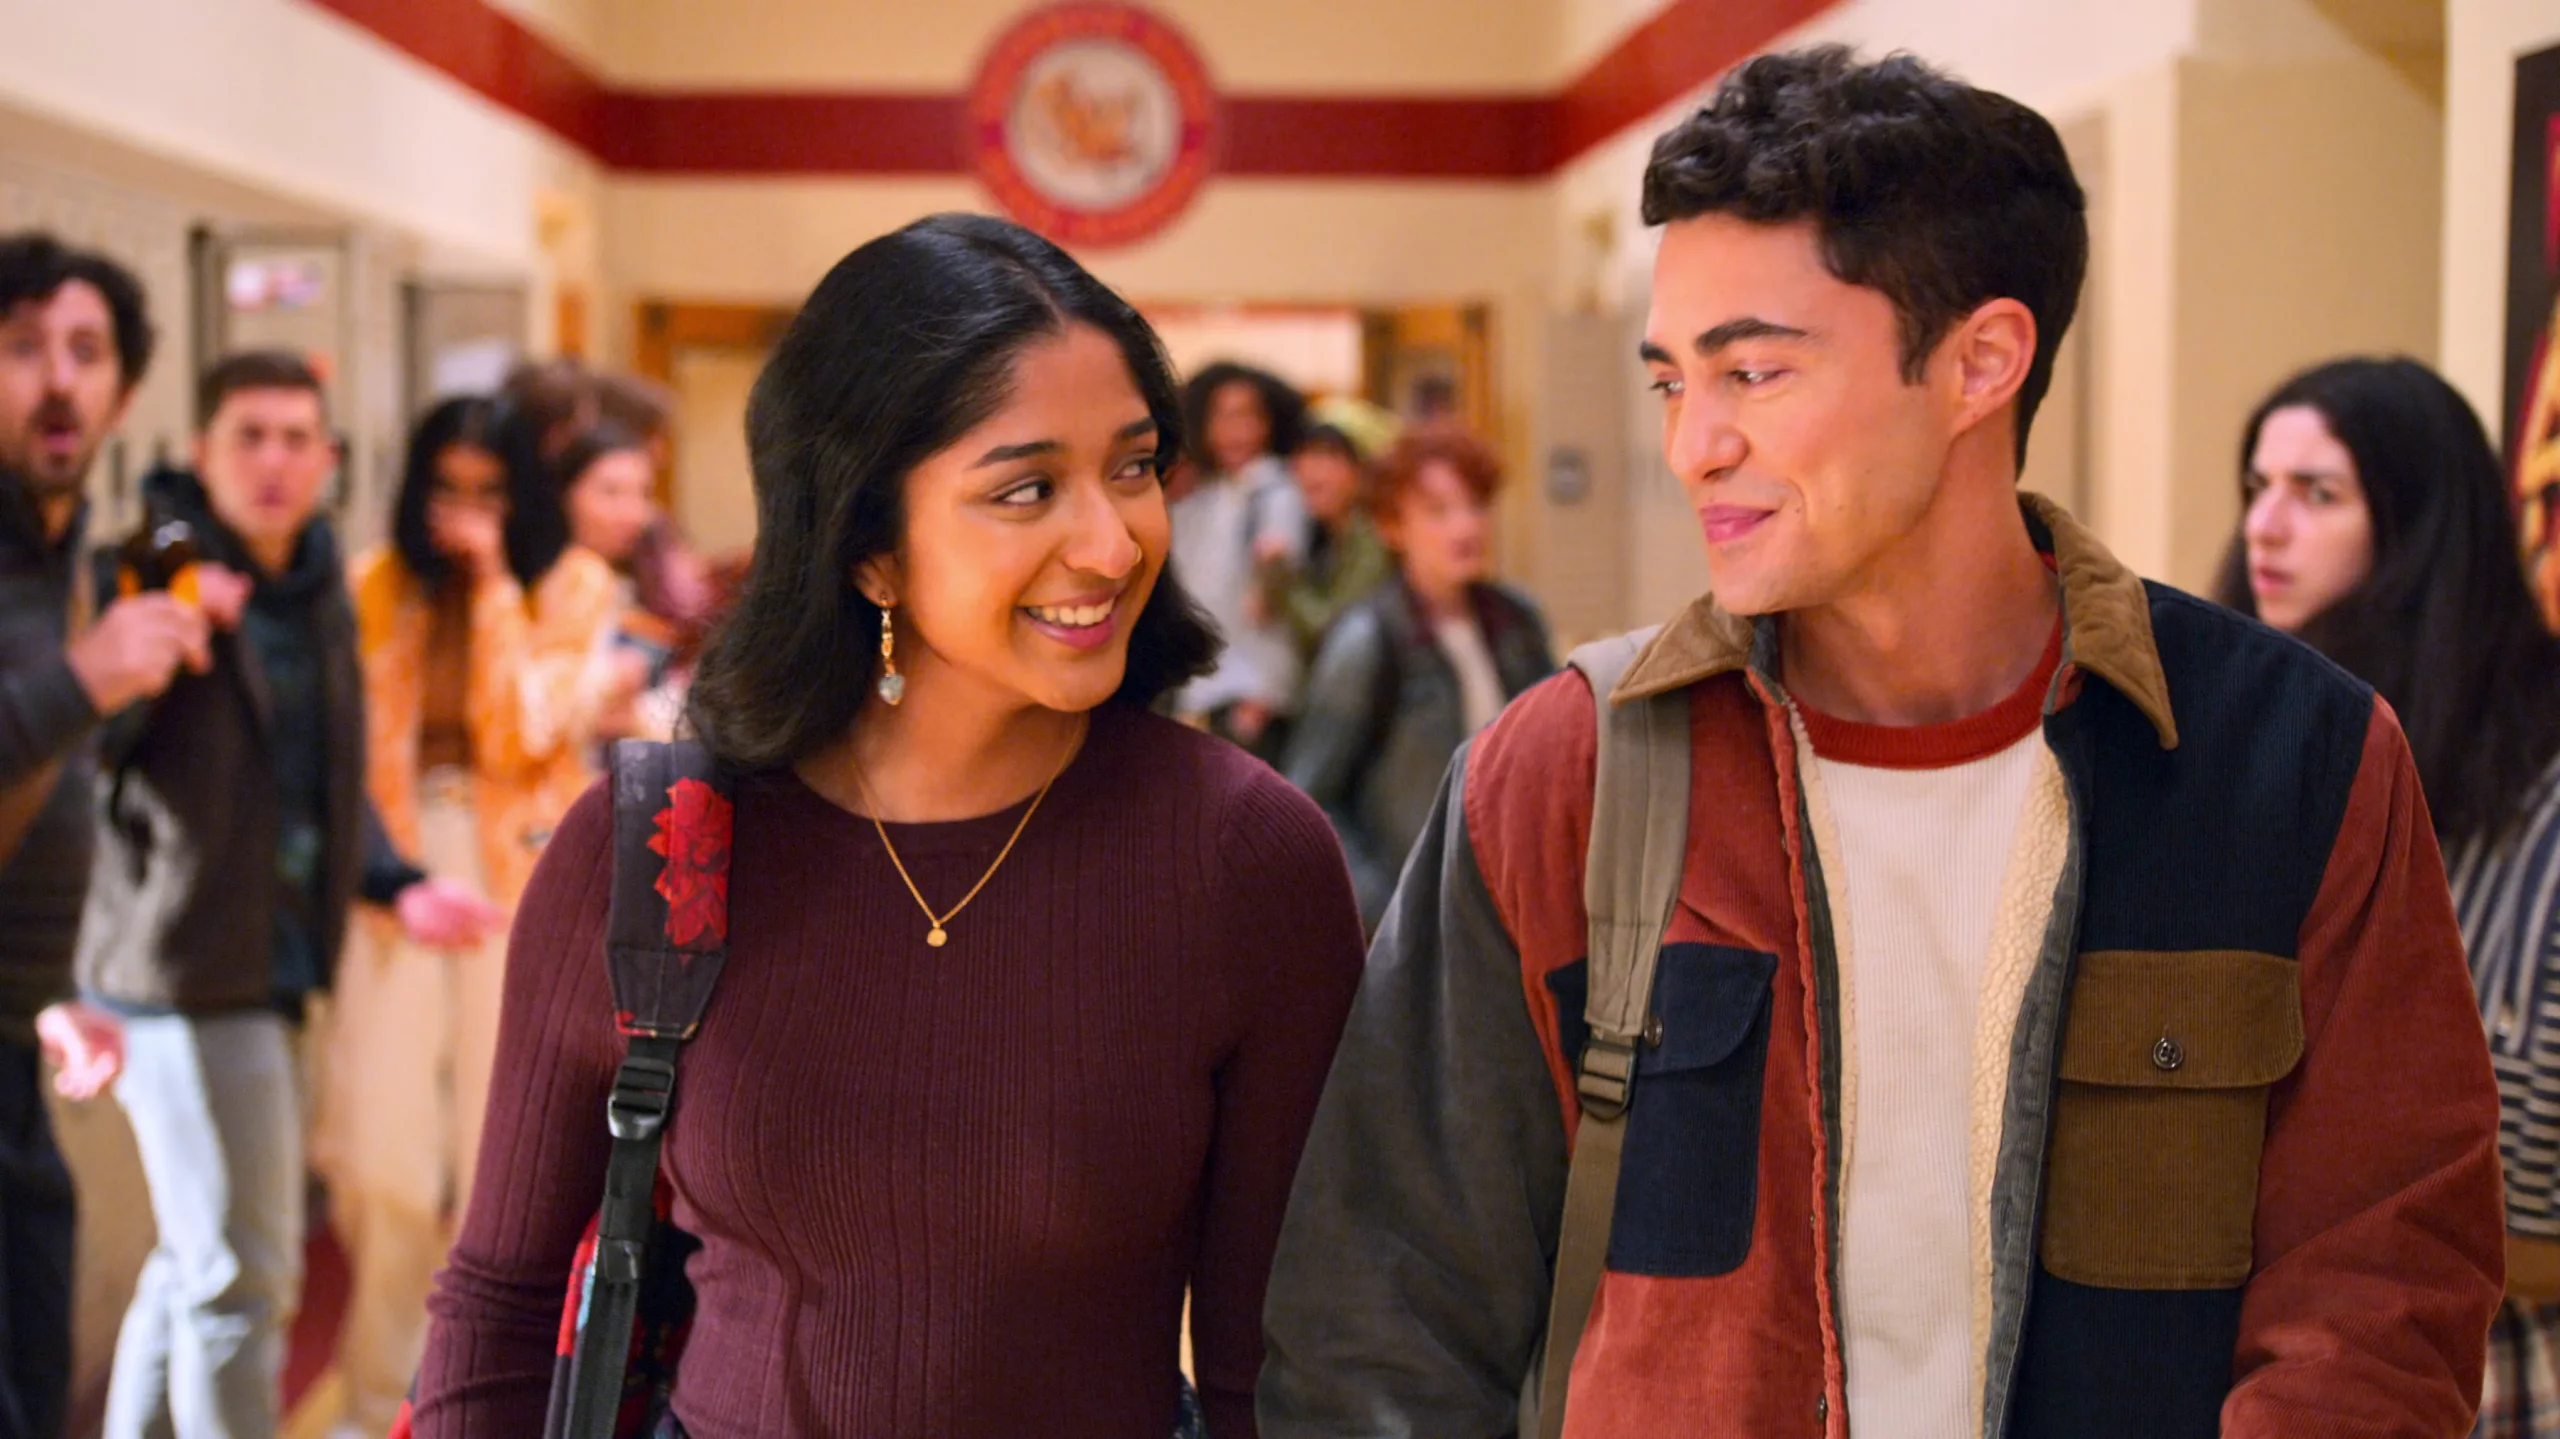 Paxton and Devi walk hand-in-hand, smiling at each other, down a crowded high school hallway